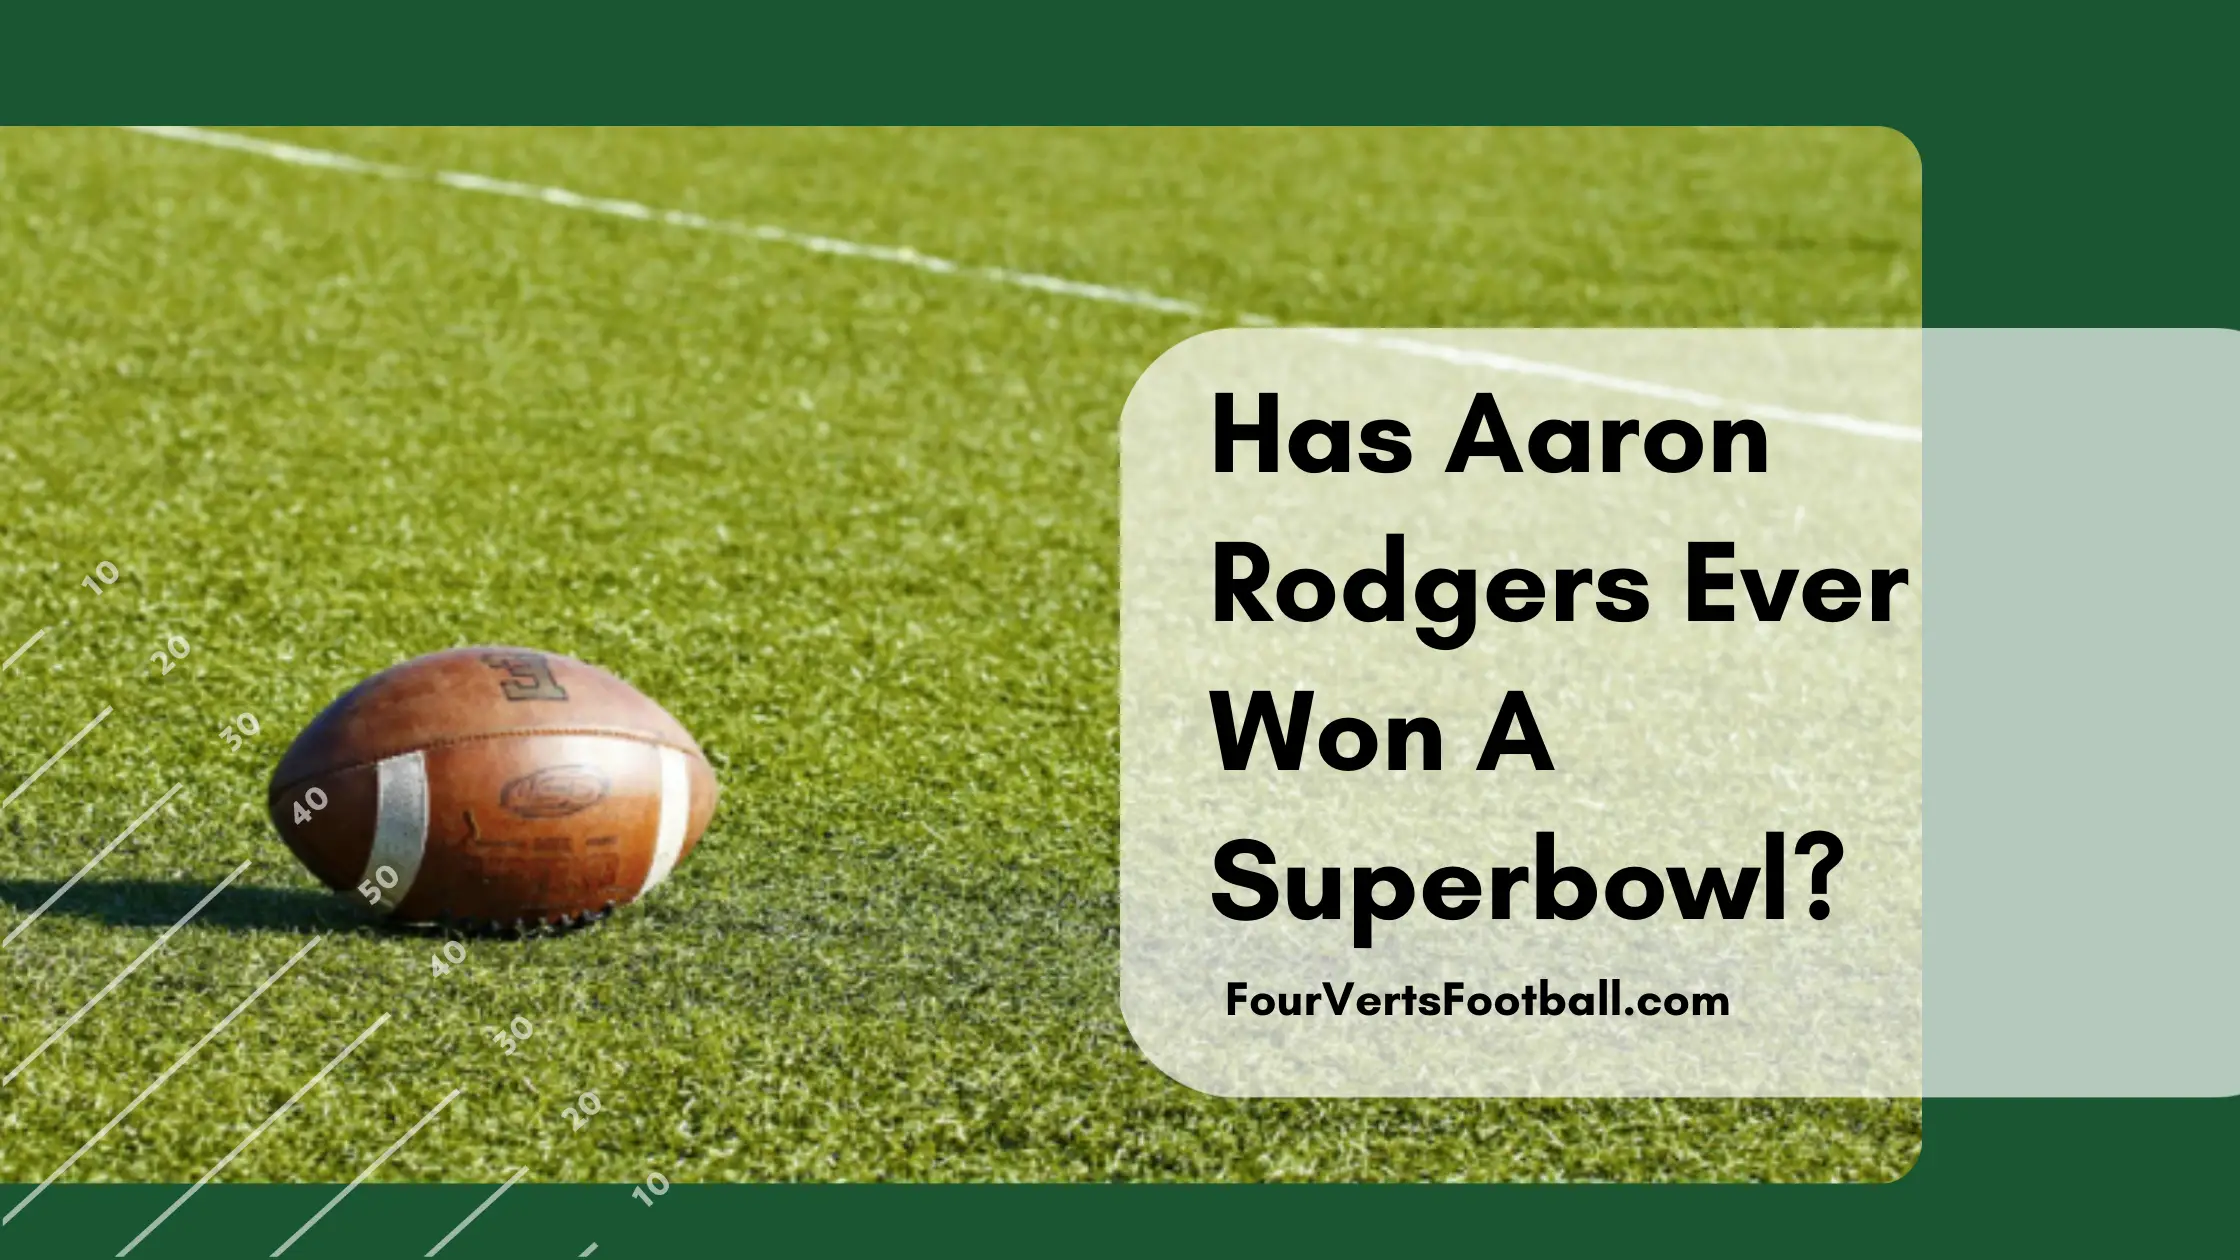 has aaron rodgers won a superbowl